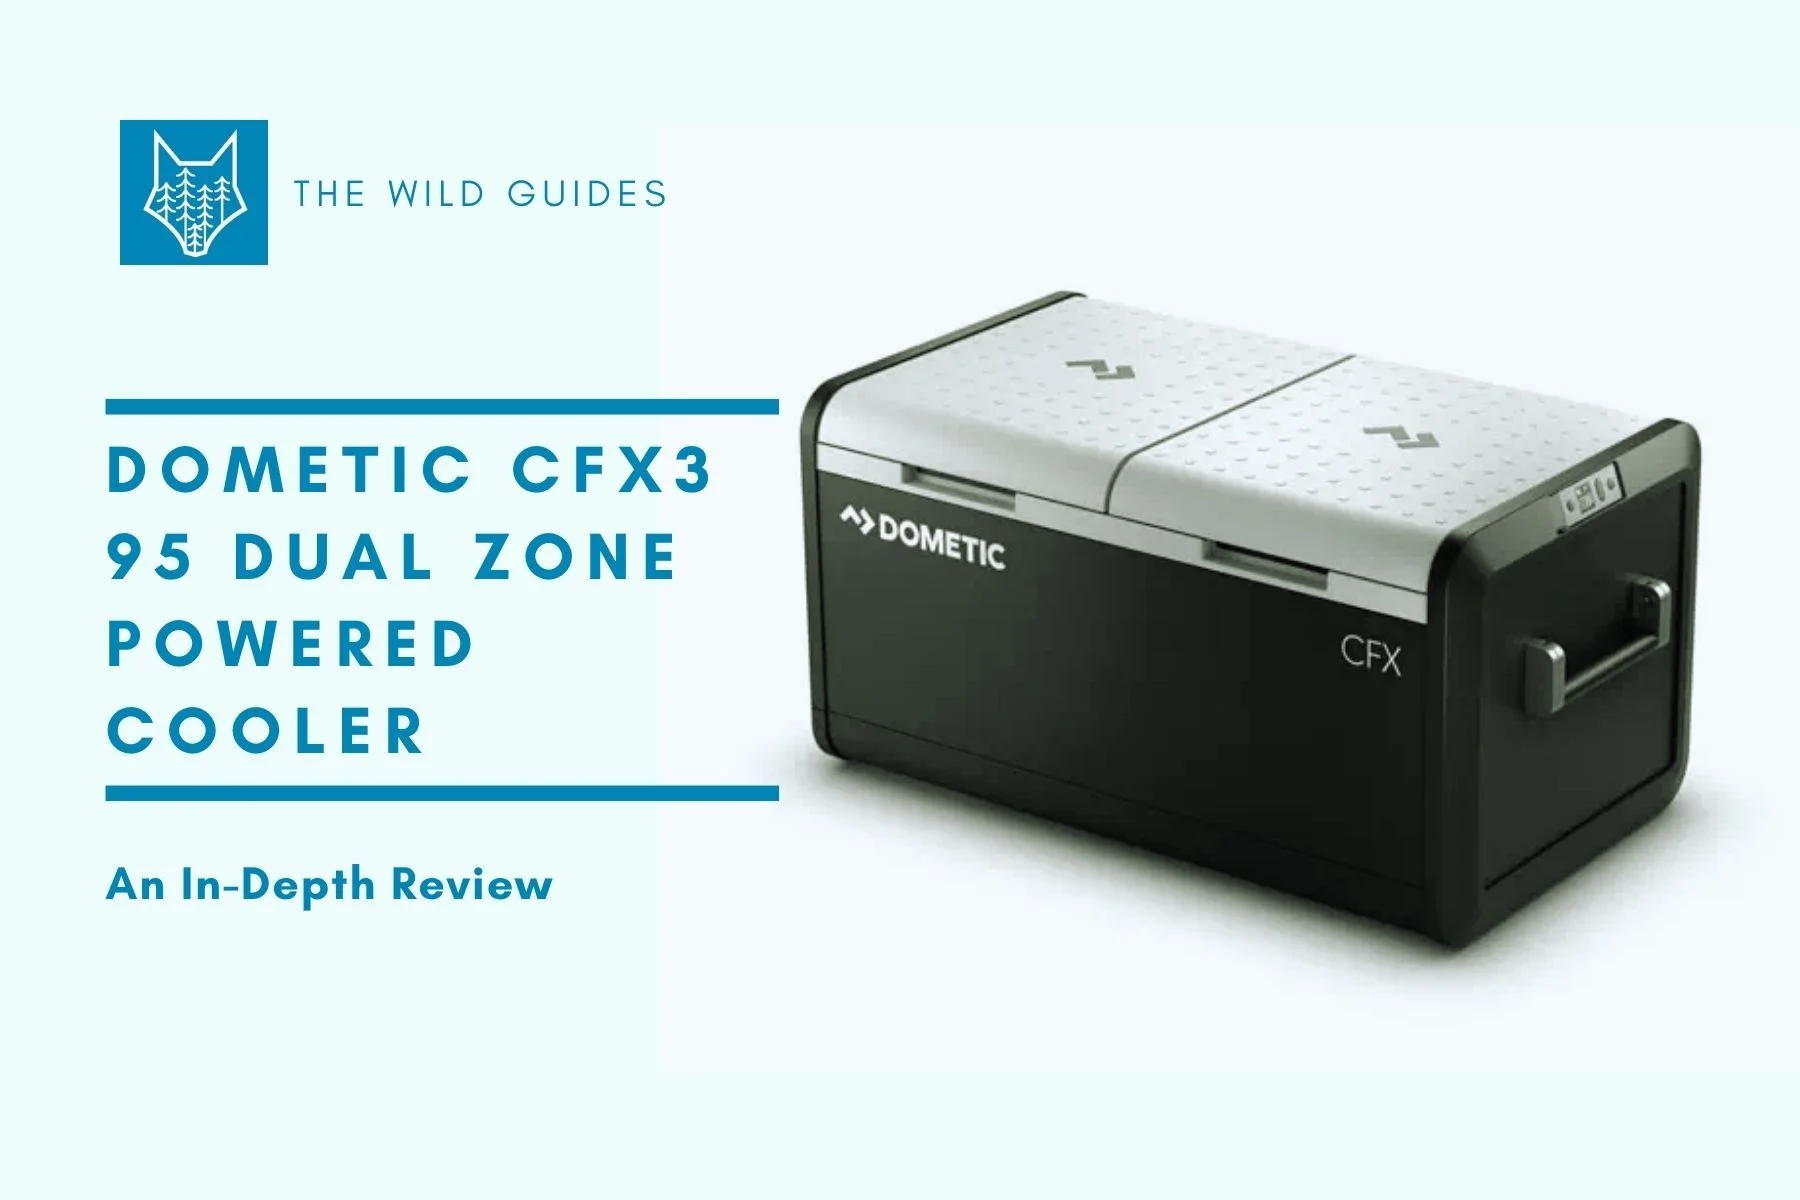 Dometic CFX3 95 Dual Zone Powered Cooler Review - Updated